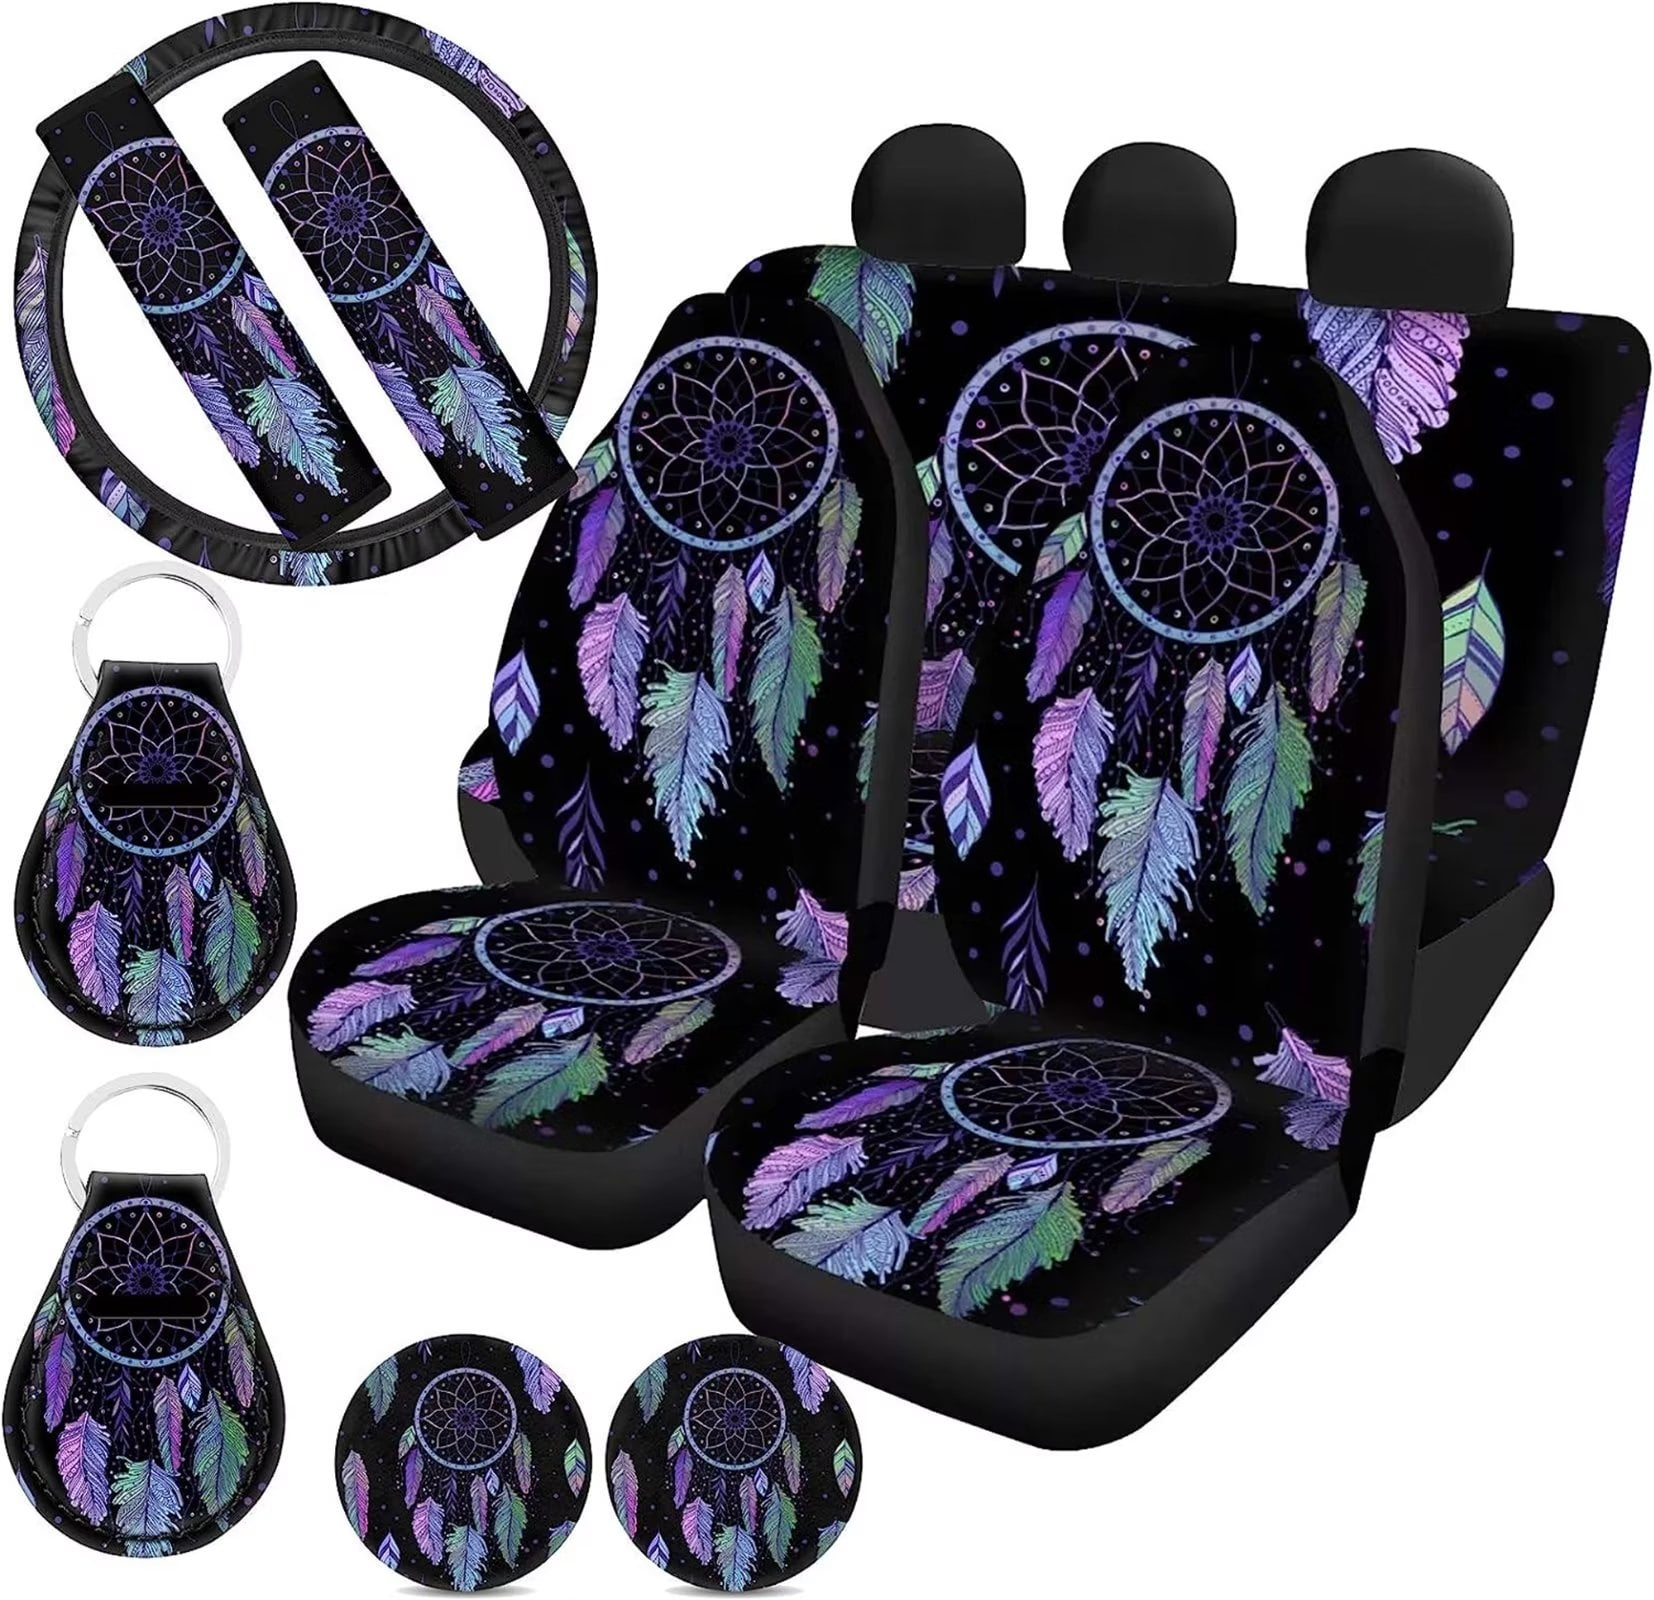  Uourmeti Bat Gothic Car Accessories Car Seat Covers and  Steering Wheel Cover Full Set License Plate Frames Seat Belt Cushion  Keyring Keychain Witchy Colorful Universal Car Decor Gift for Car Lovers 